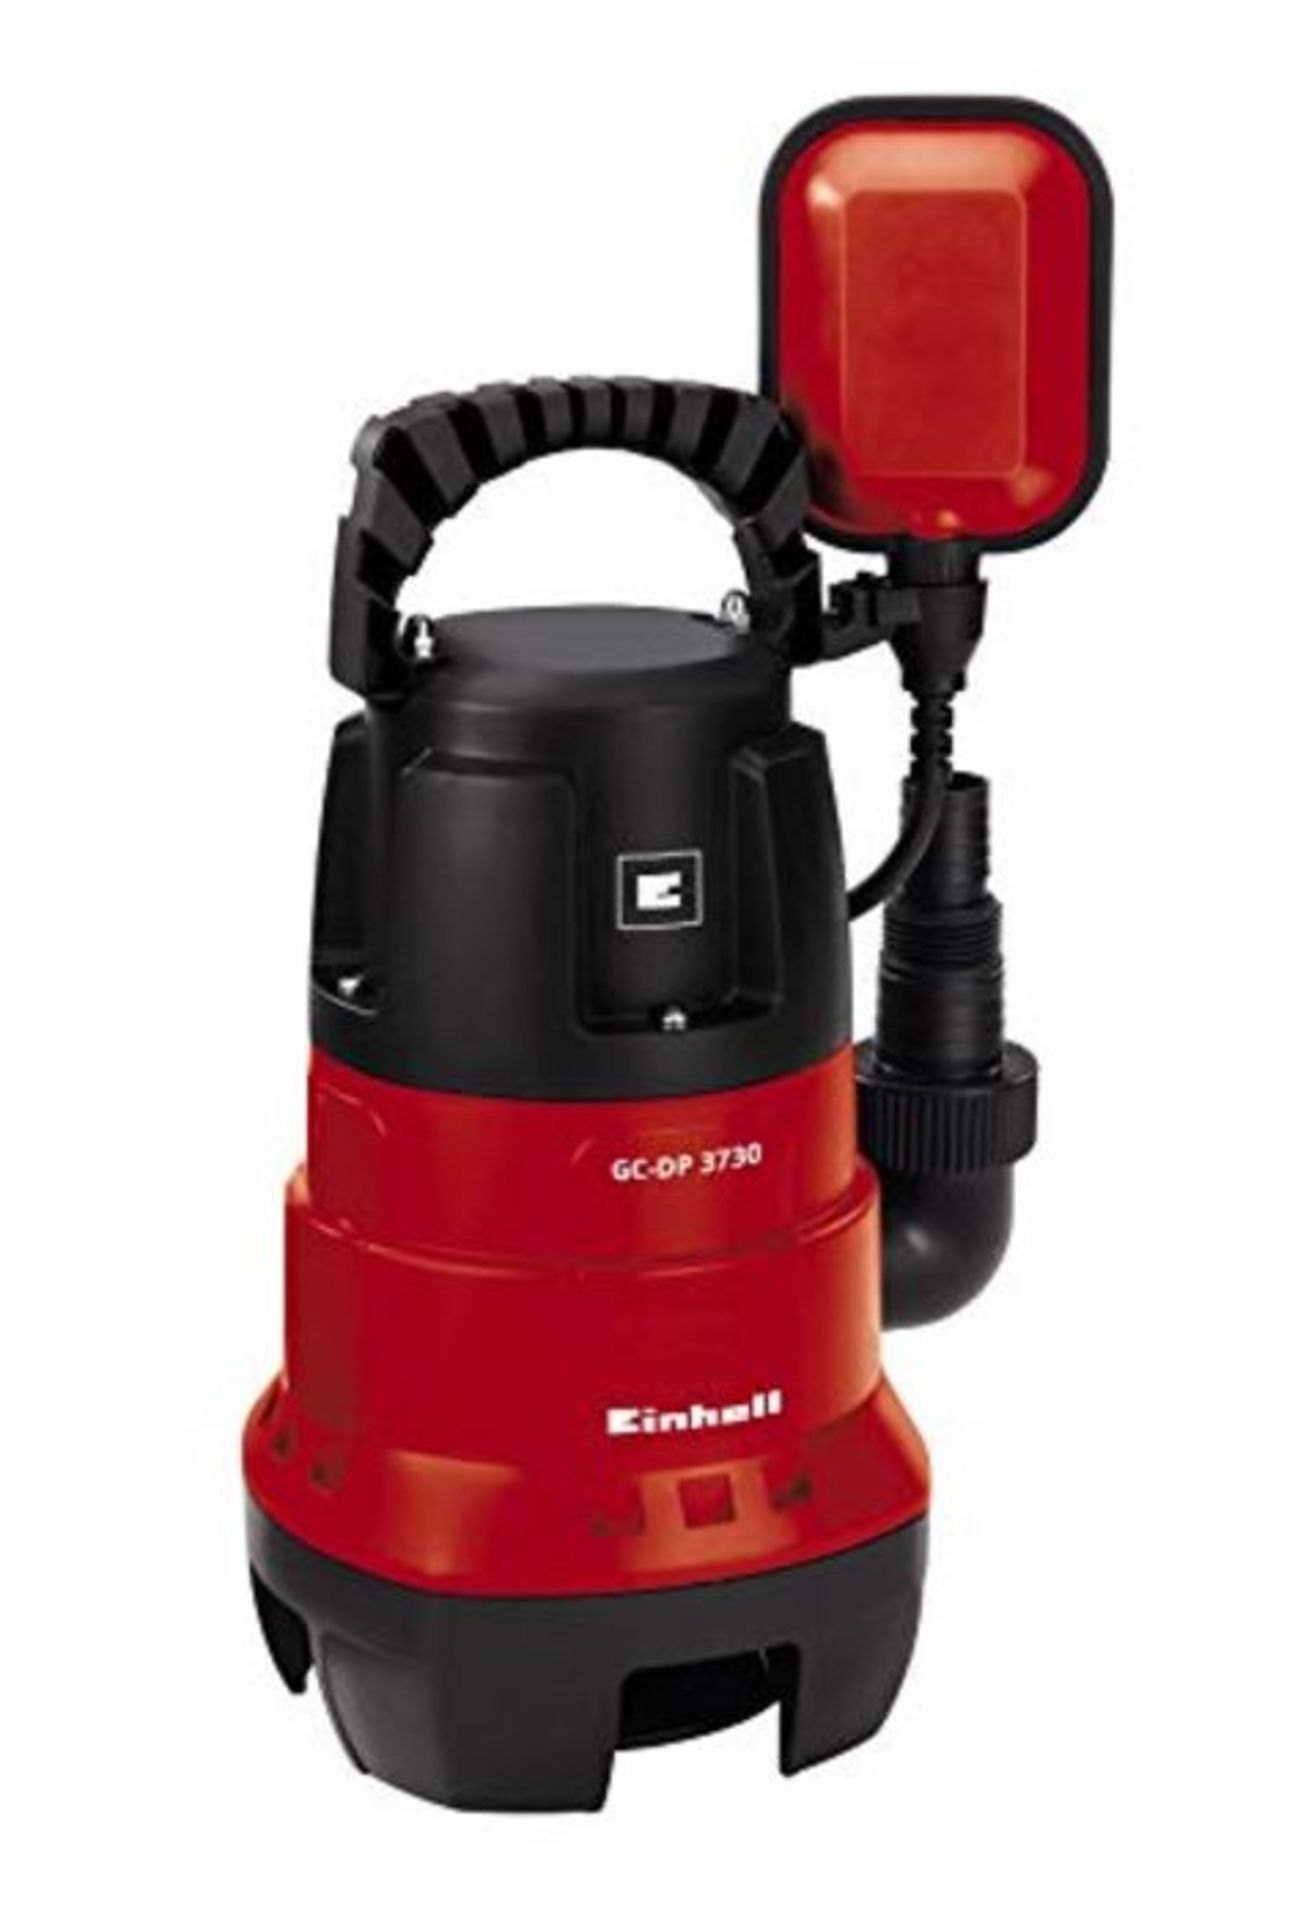 Einhell GC-DP 3730 Clean / Dirty Water Pump | 370W Submersible Pump, 9000 L/H, Float S